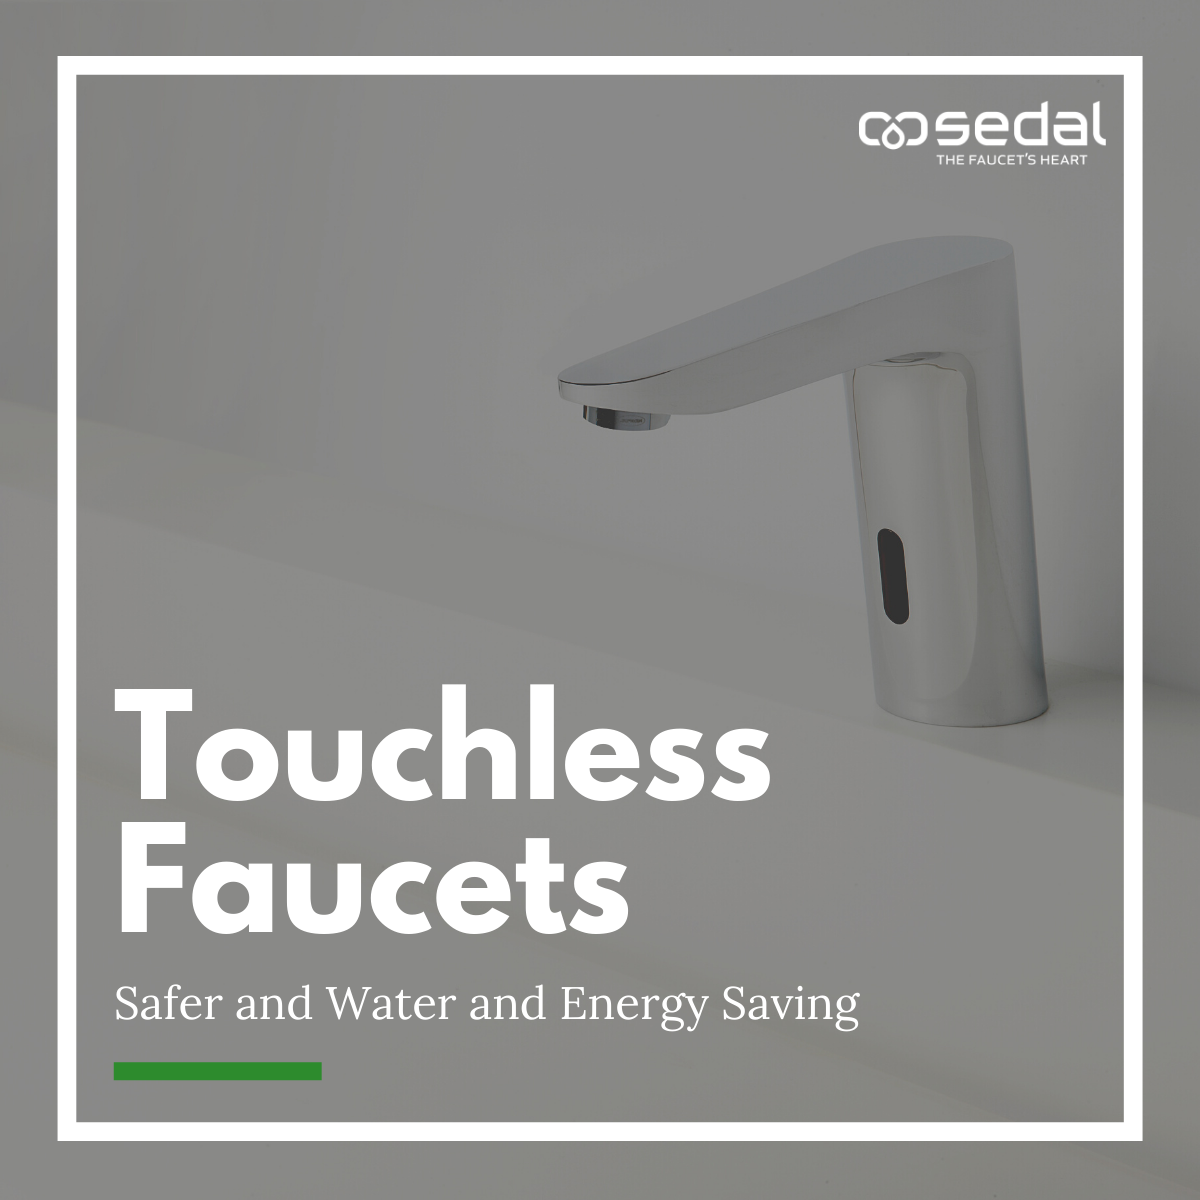 Touchless Faucets, safer and water and energy saving